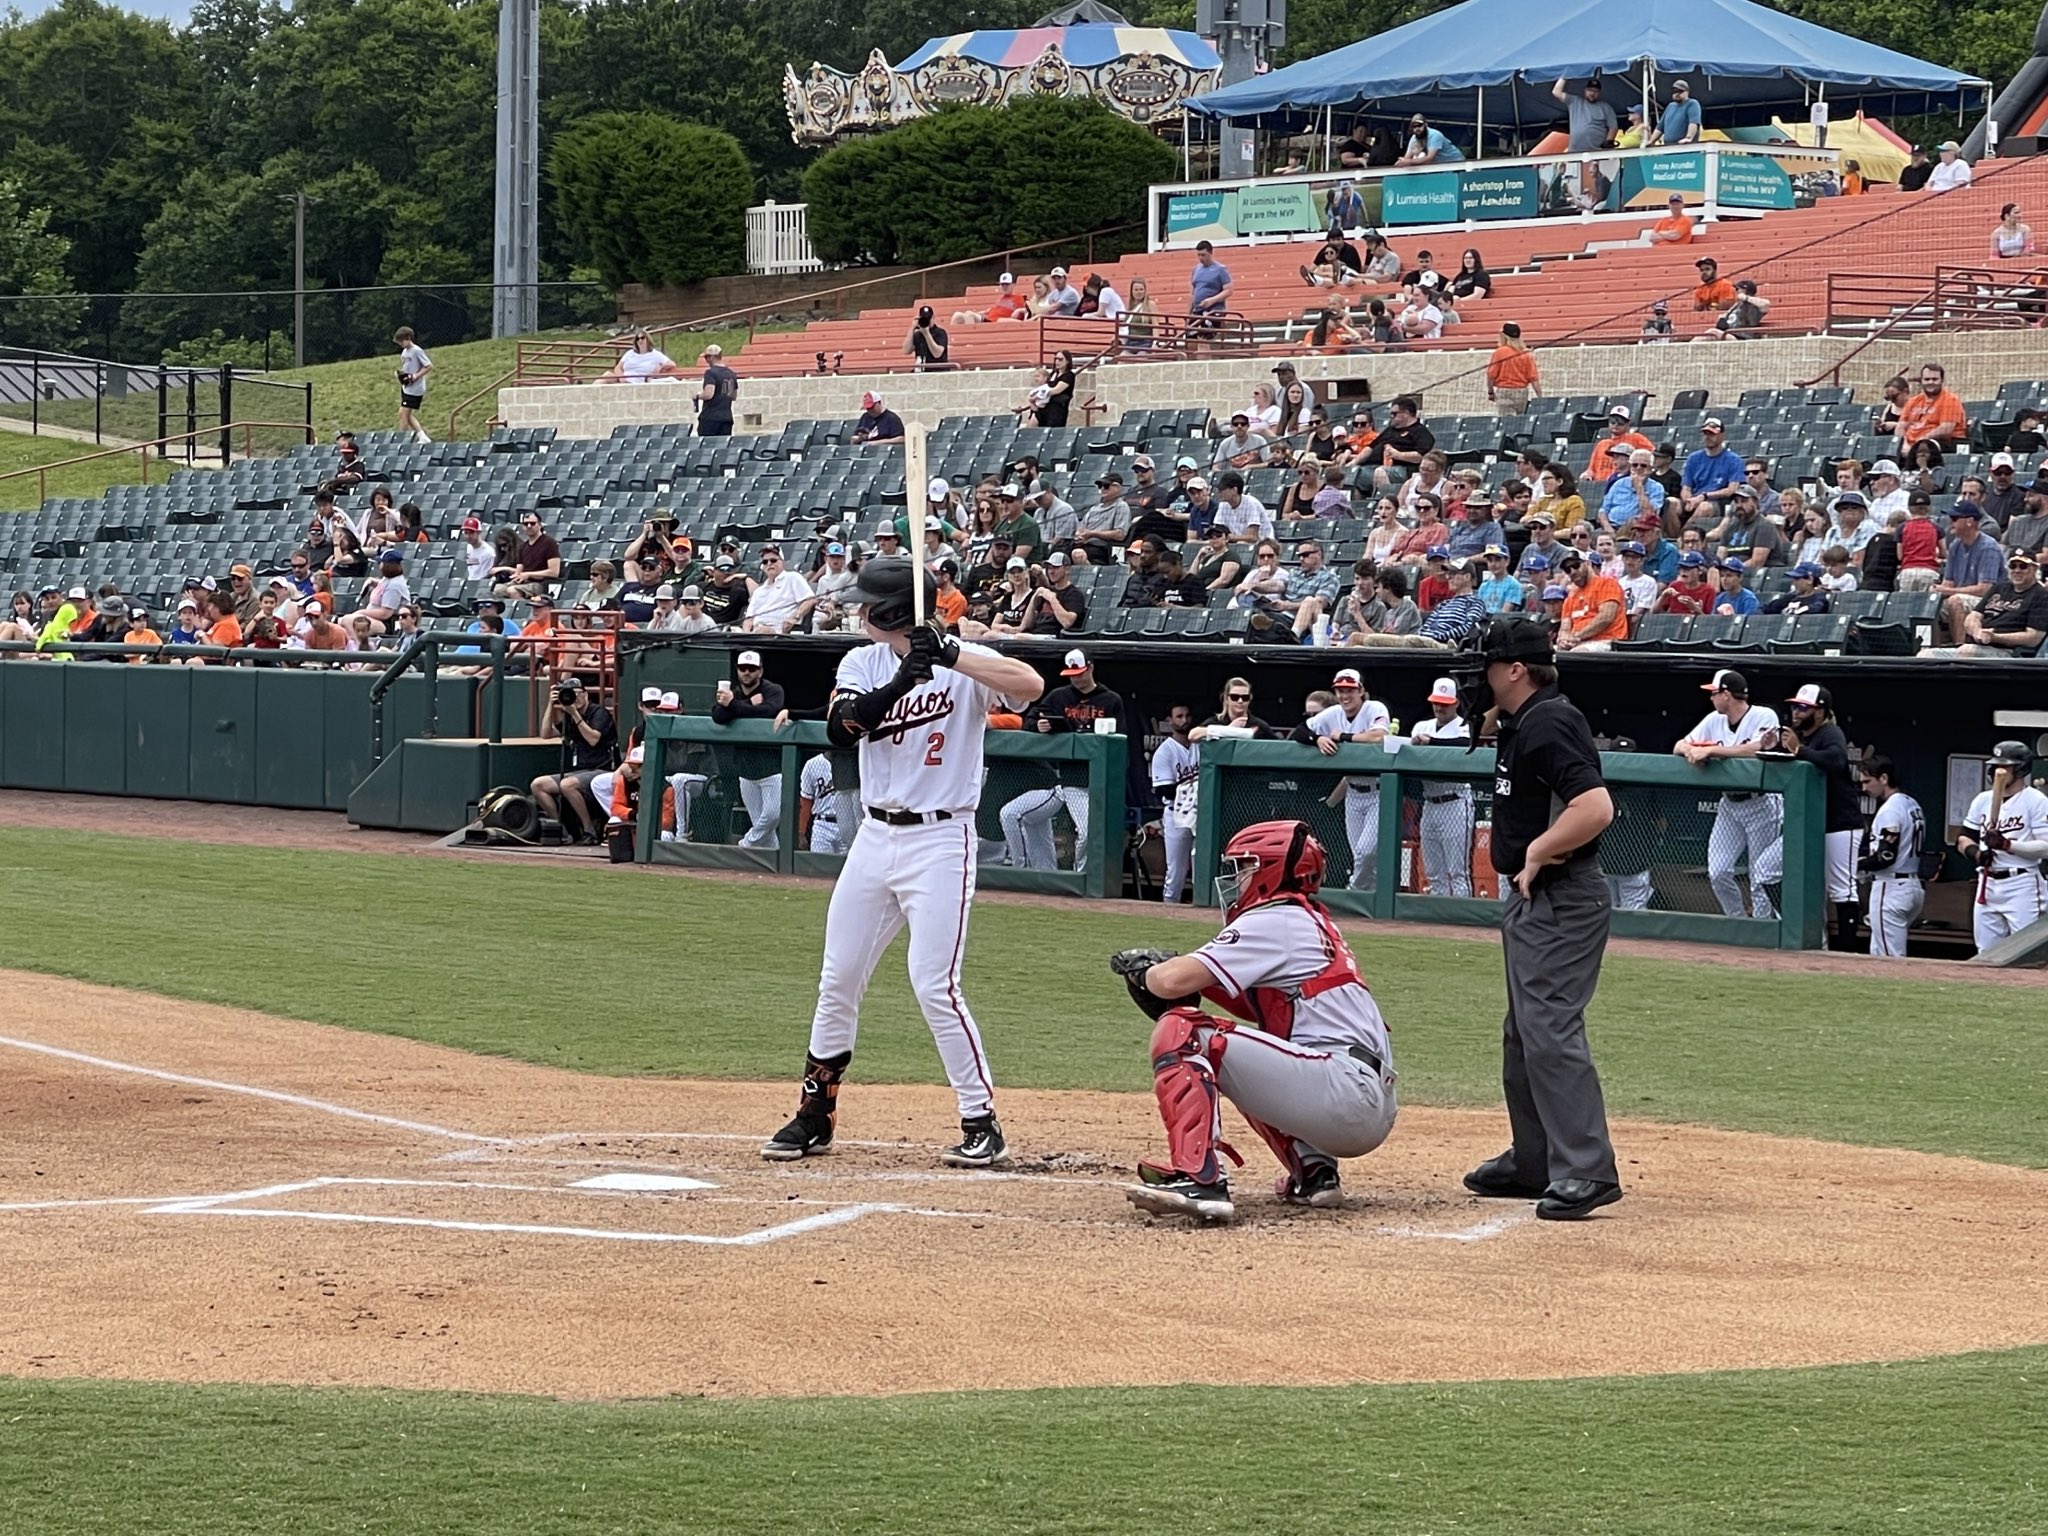 Jake Russell on X: Taking in some Senators-Baysox on a beautiful Sunday  afternoon and watching some of the top prospects of the local MLB teams:  James Wood, Robert Hassell III, Heston Kjerstad